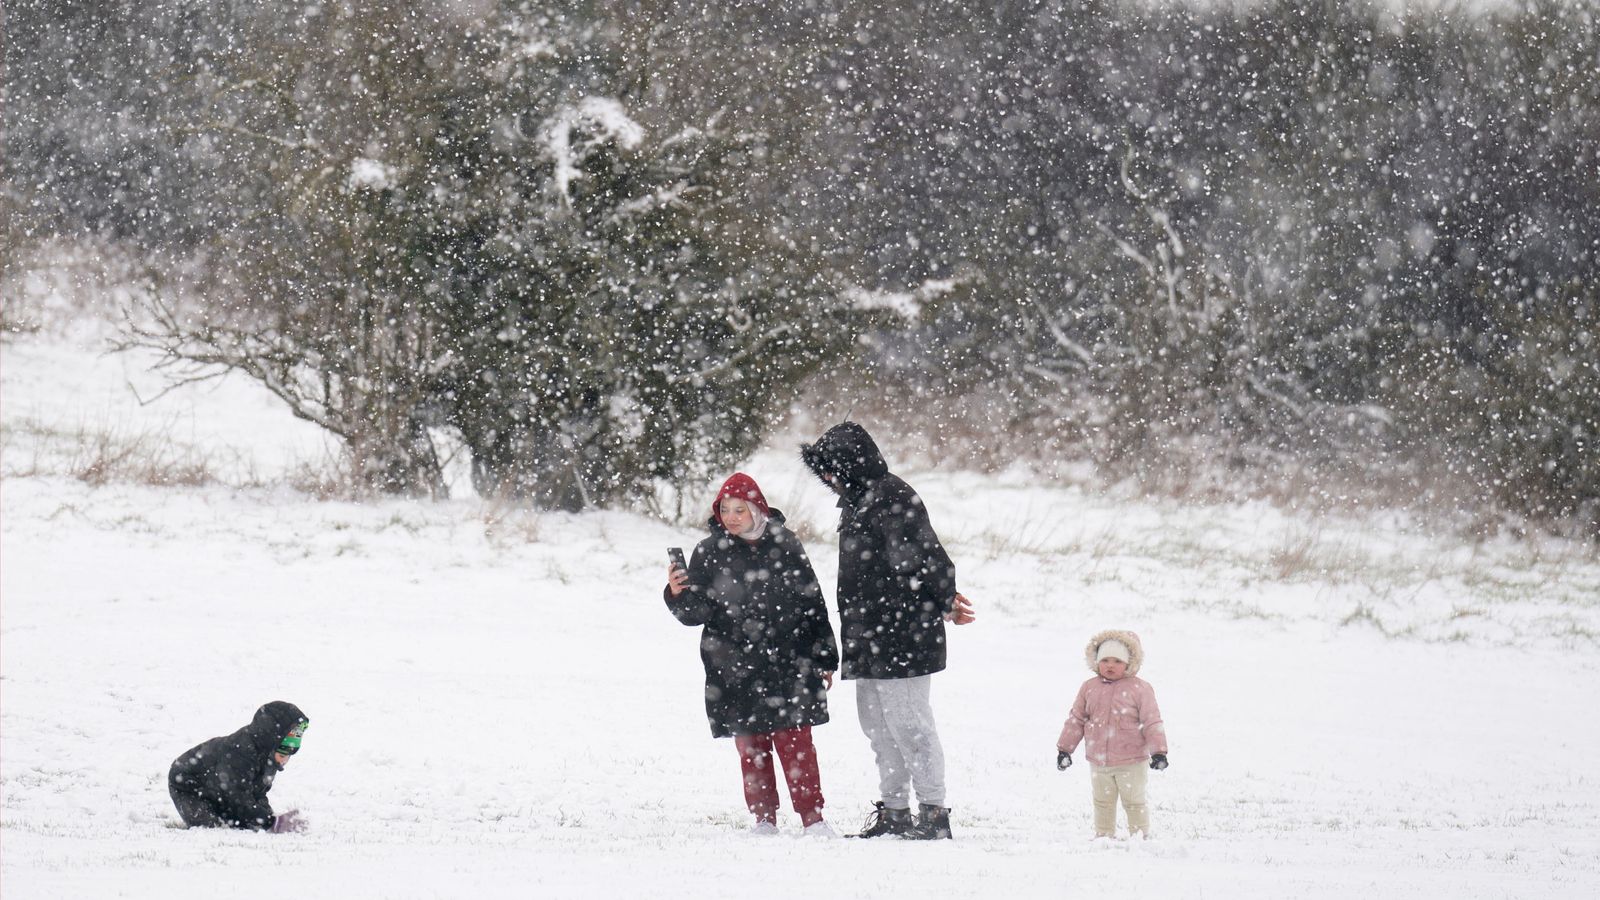 UK weather: Warnings of heavy snow, strong winds and blizzards as cold snap grips country